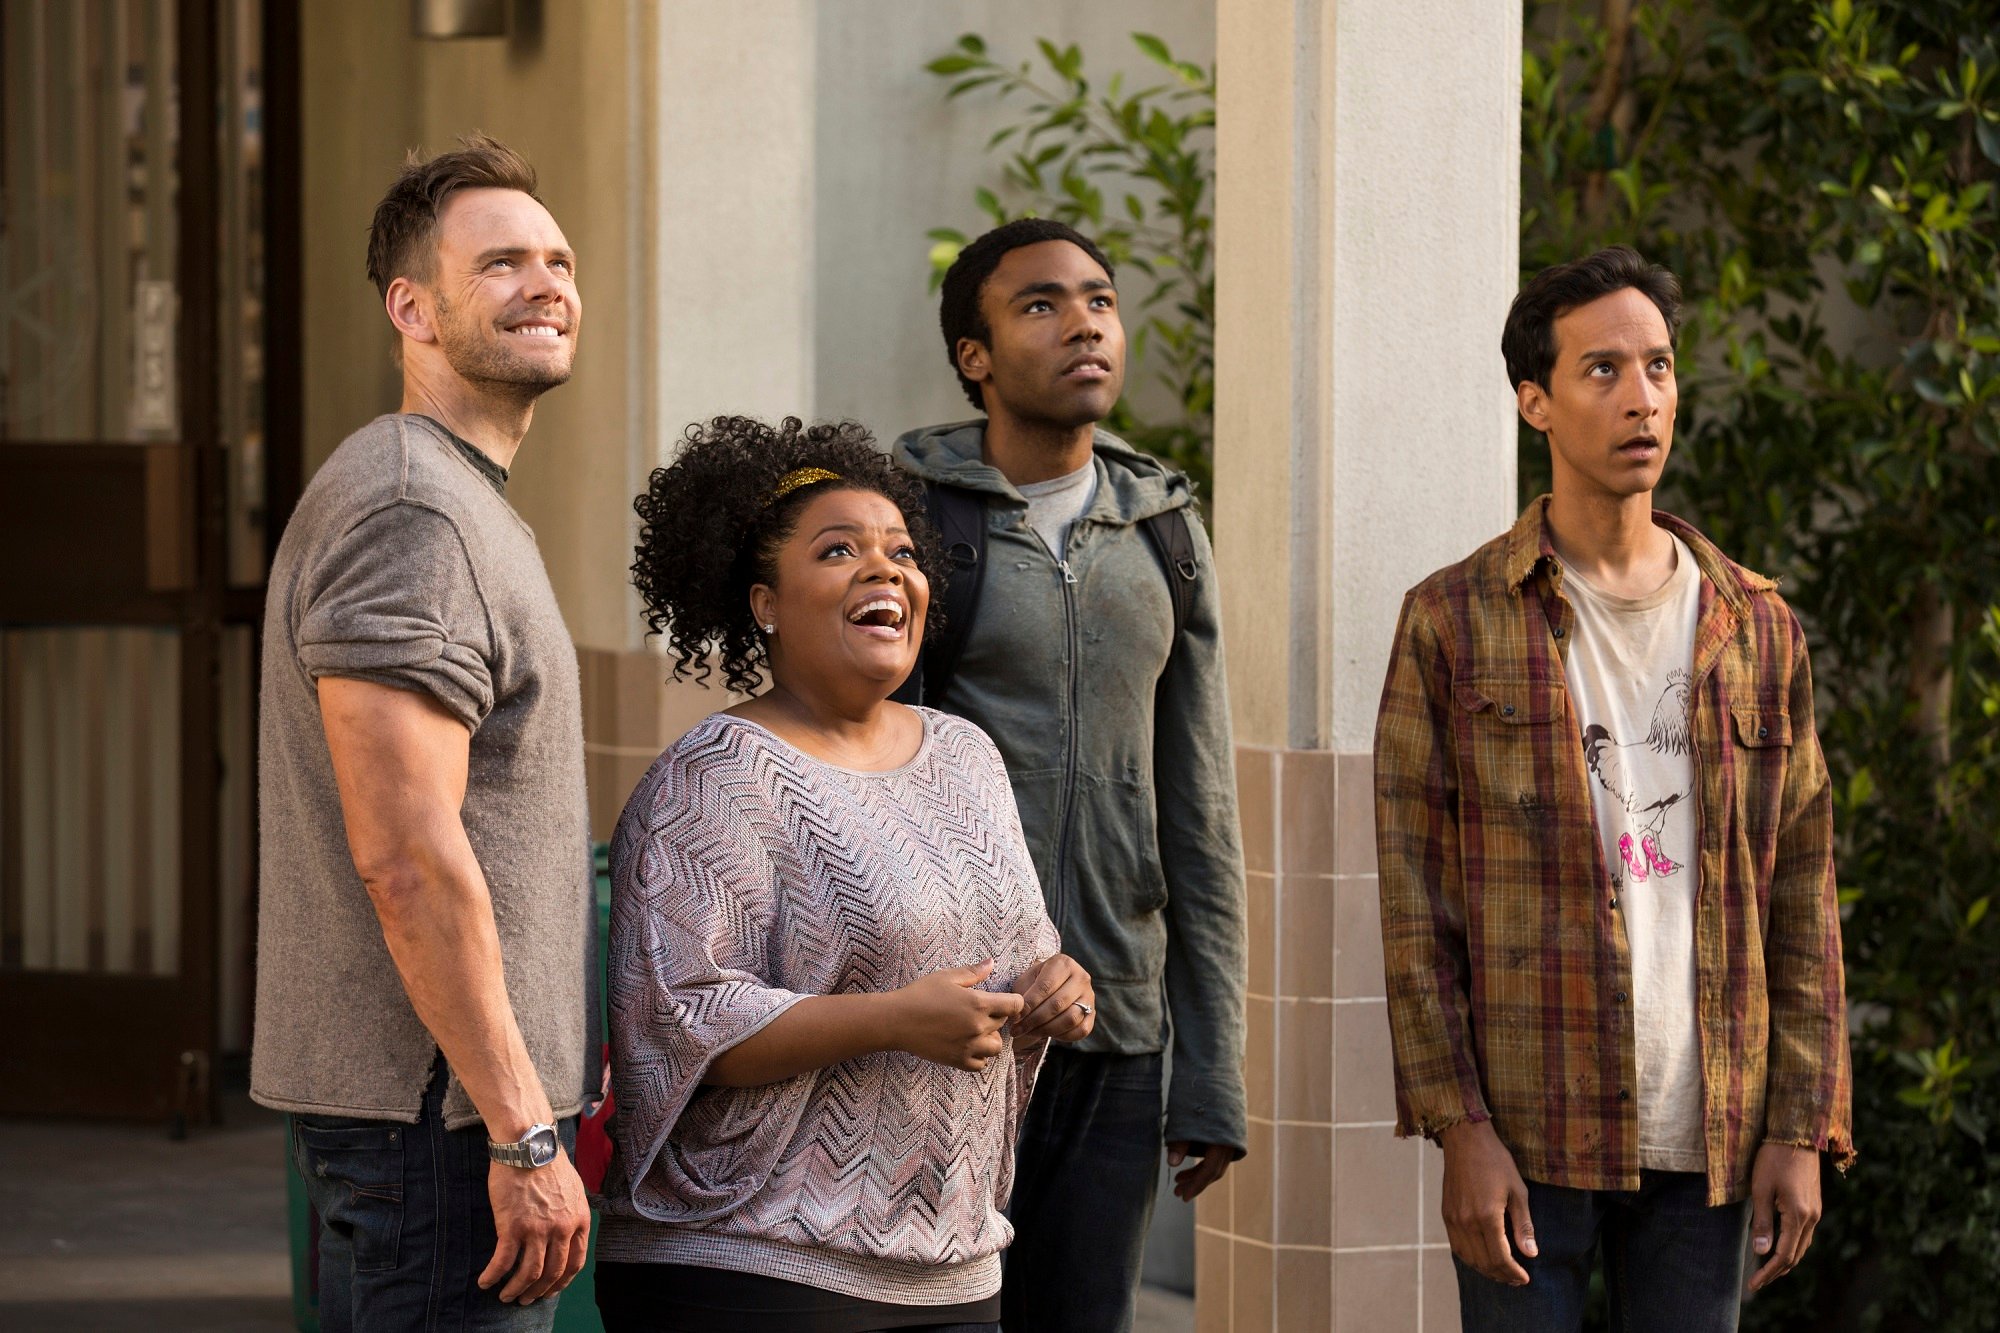 Joel McHale, Yvette Nicole Brown, Donald Glover, and Danny Pudi of Community